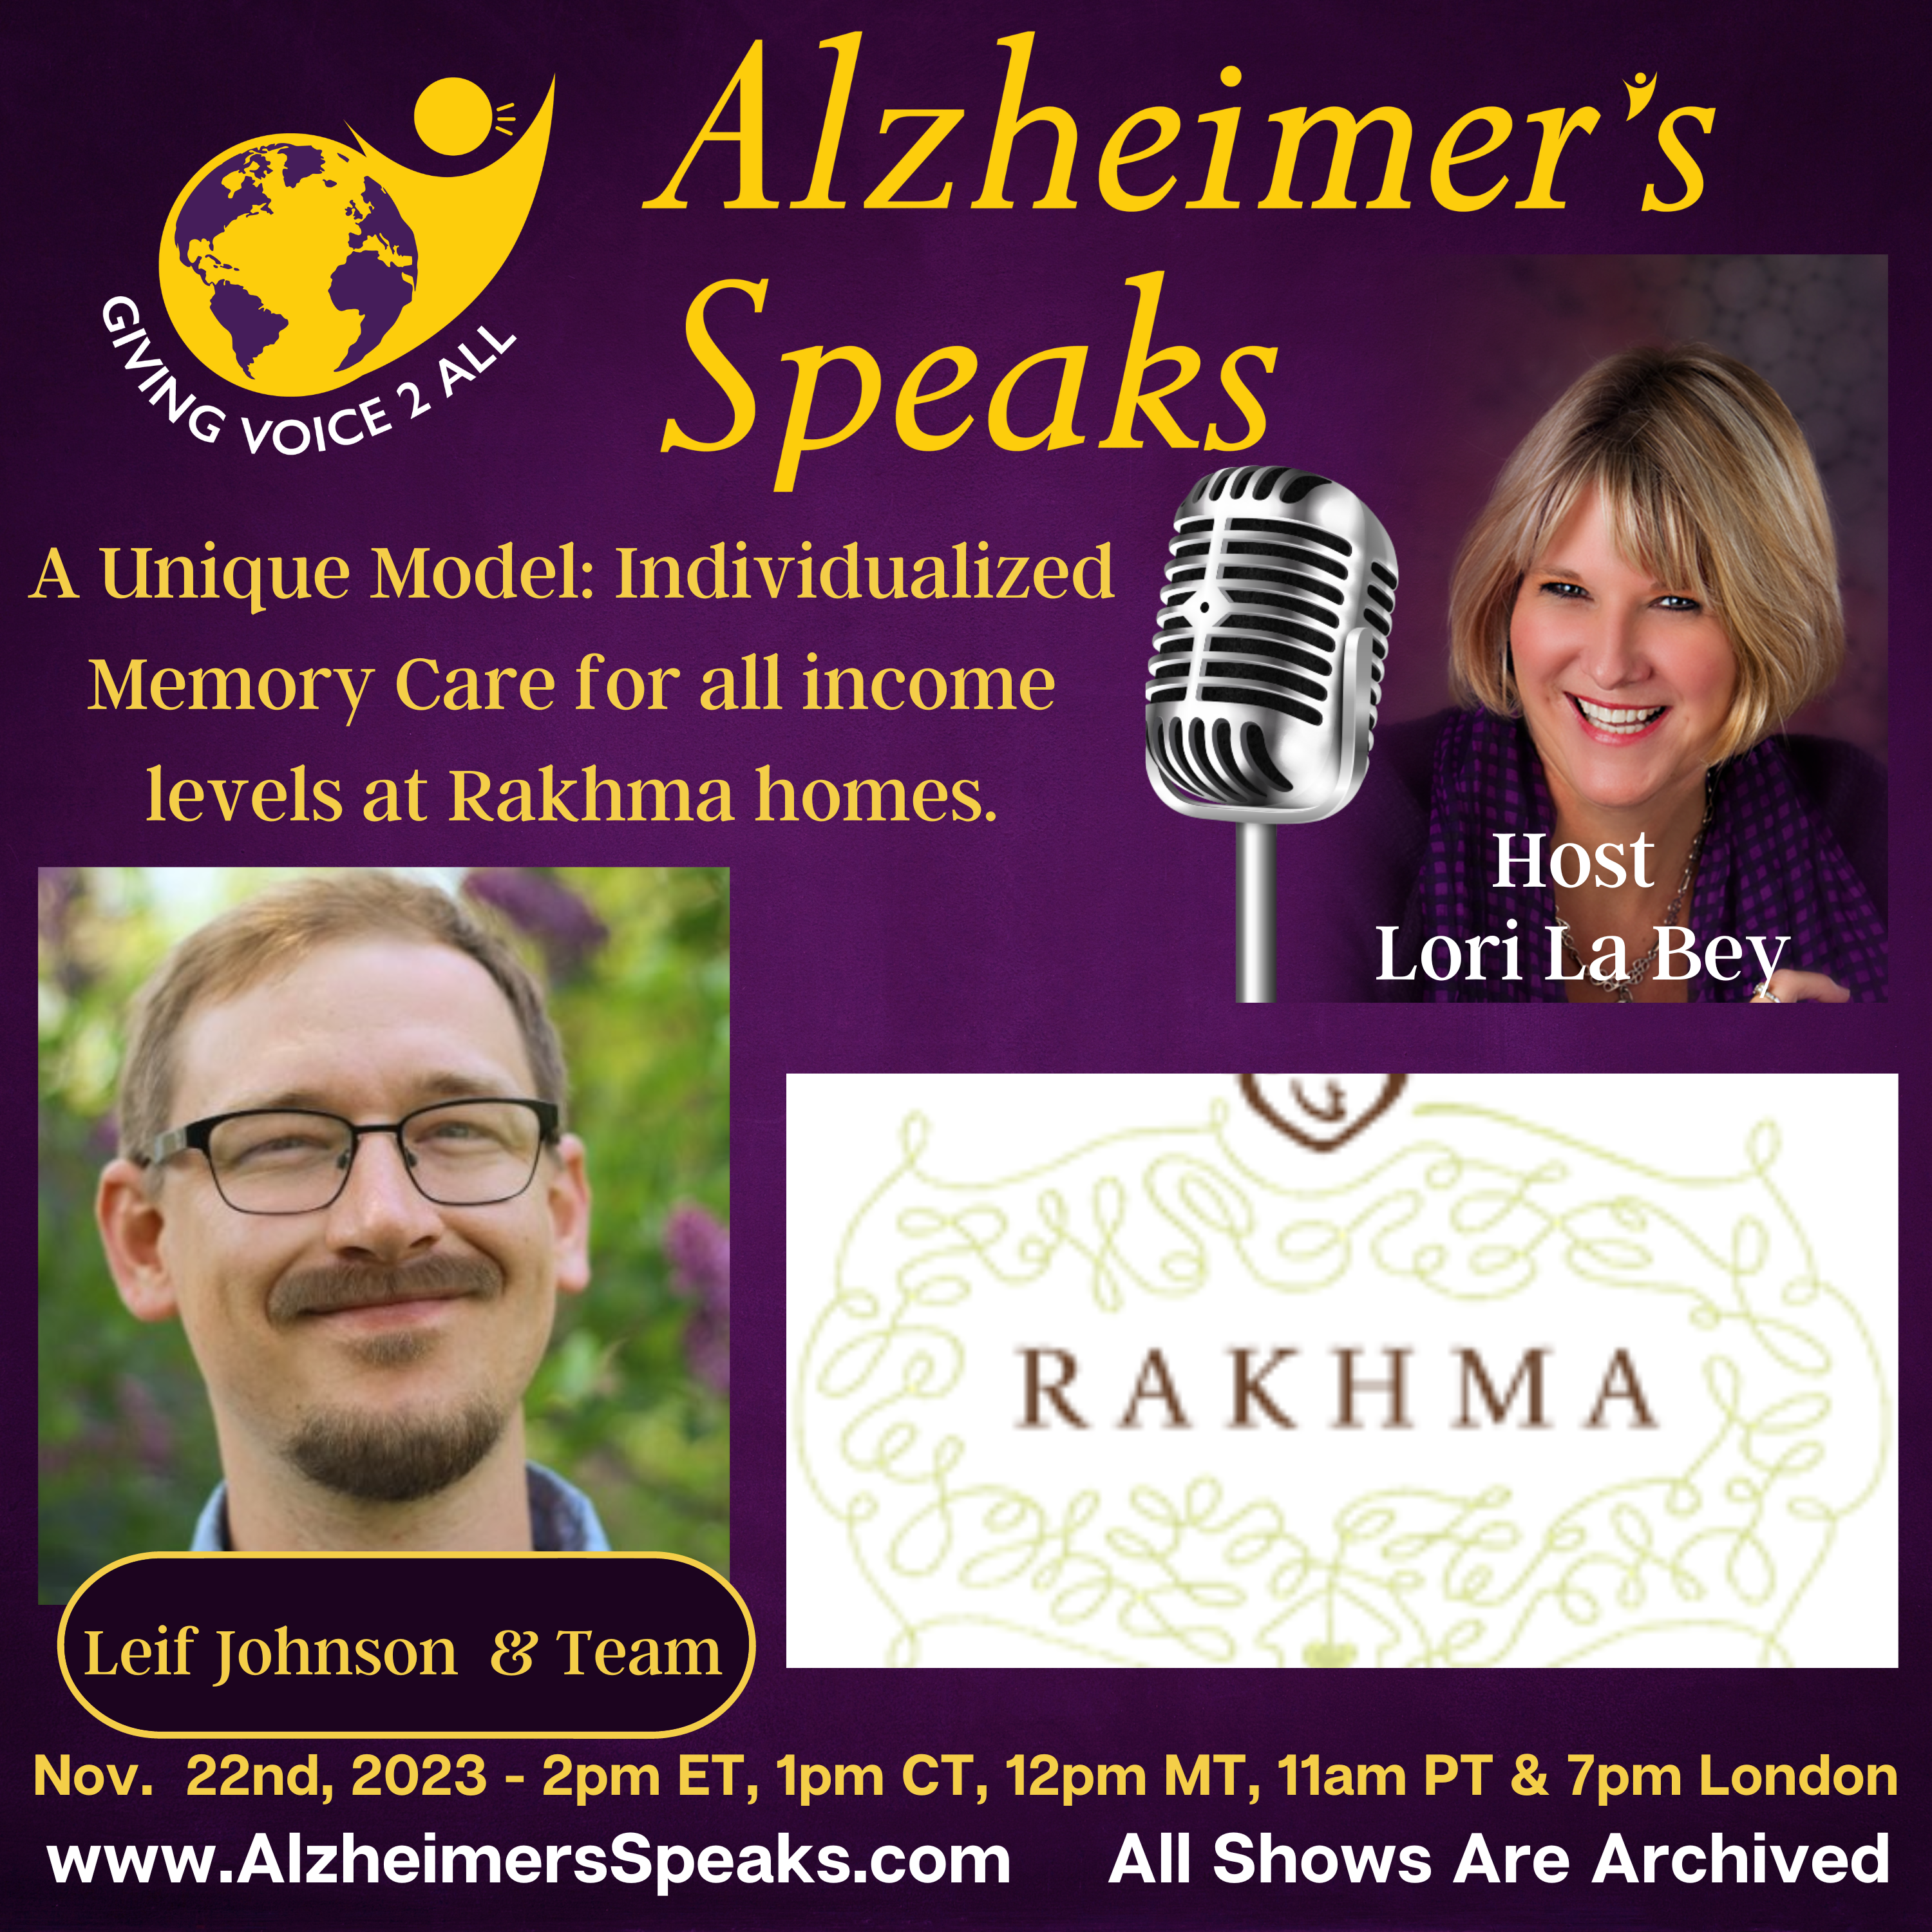 A Unique Model: Individualized Memory Care for all income levels at Rakhma homes.